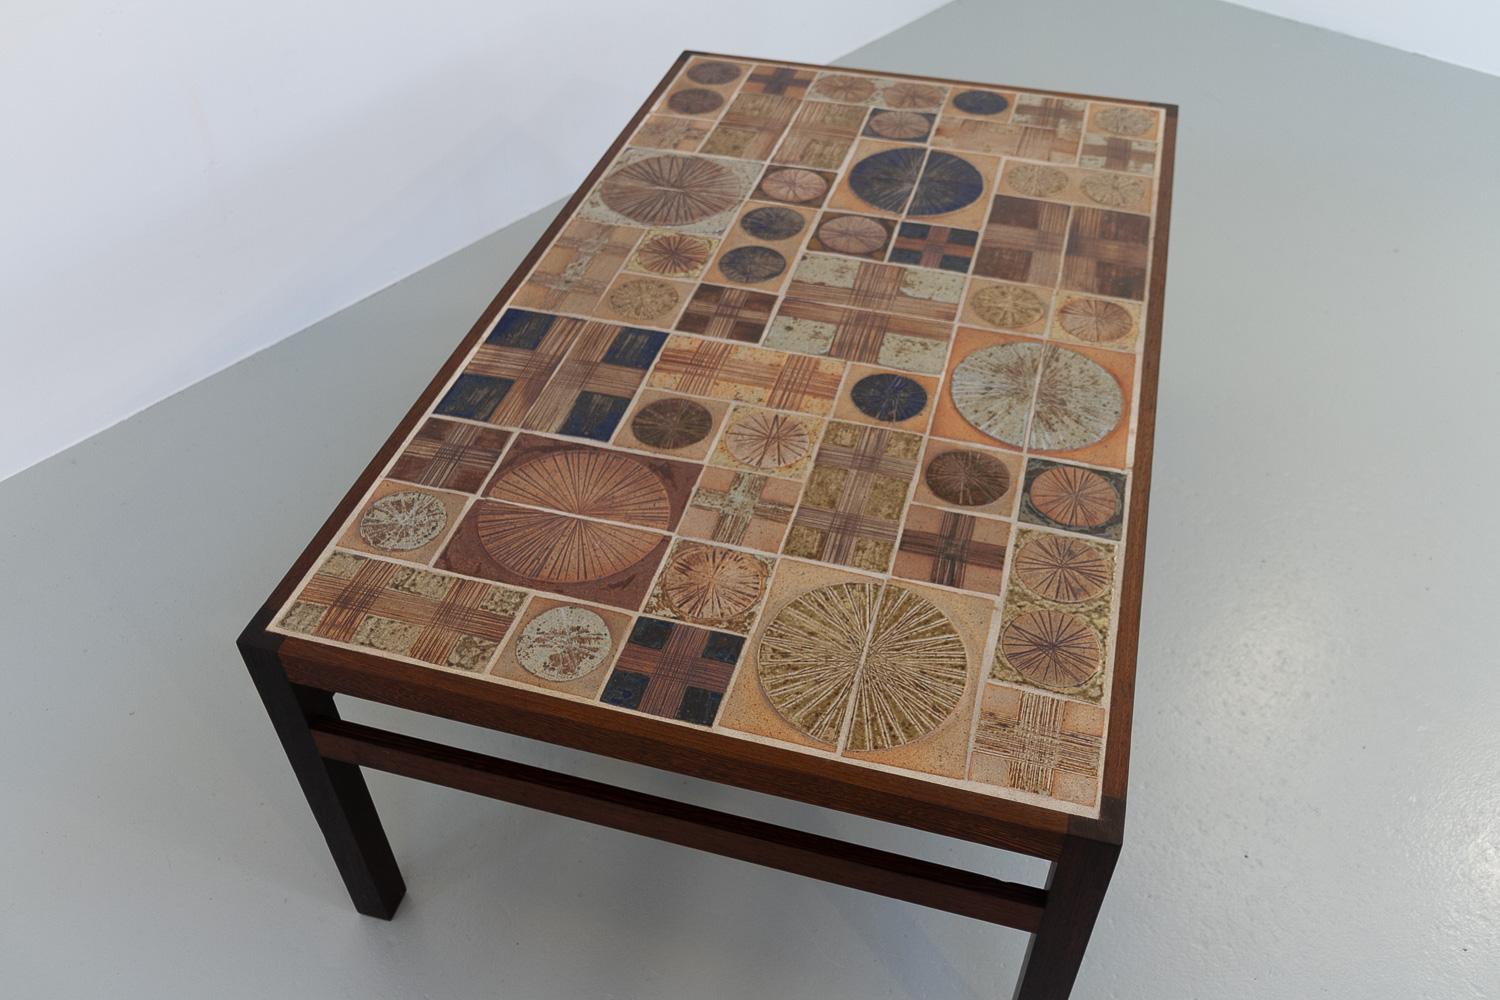 Wenge Danish Modern Tue Poulsen Tile Coffee Table in Wengé, 1960s. For Sale